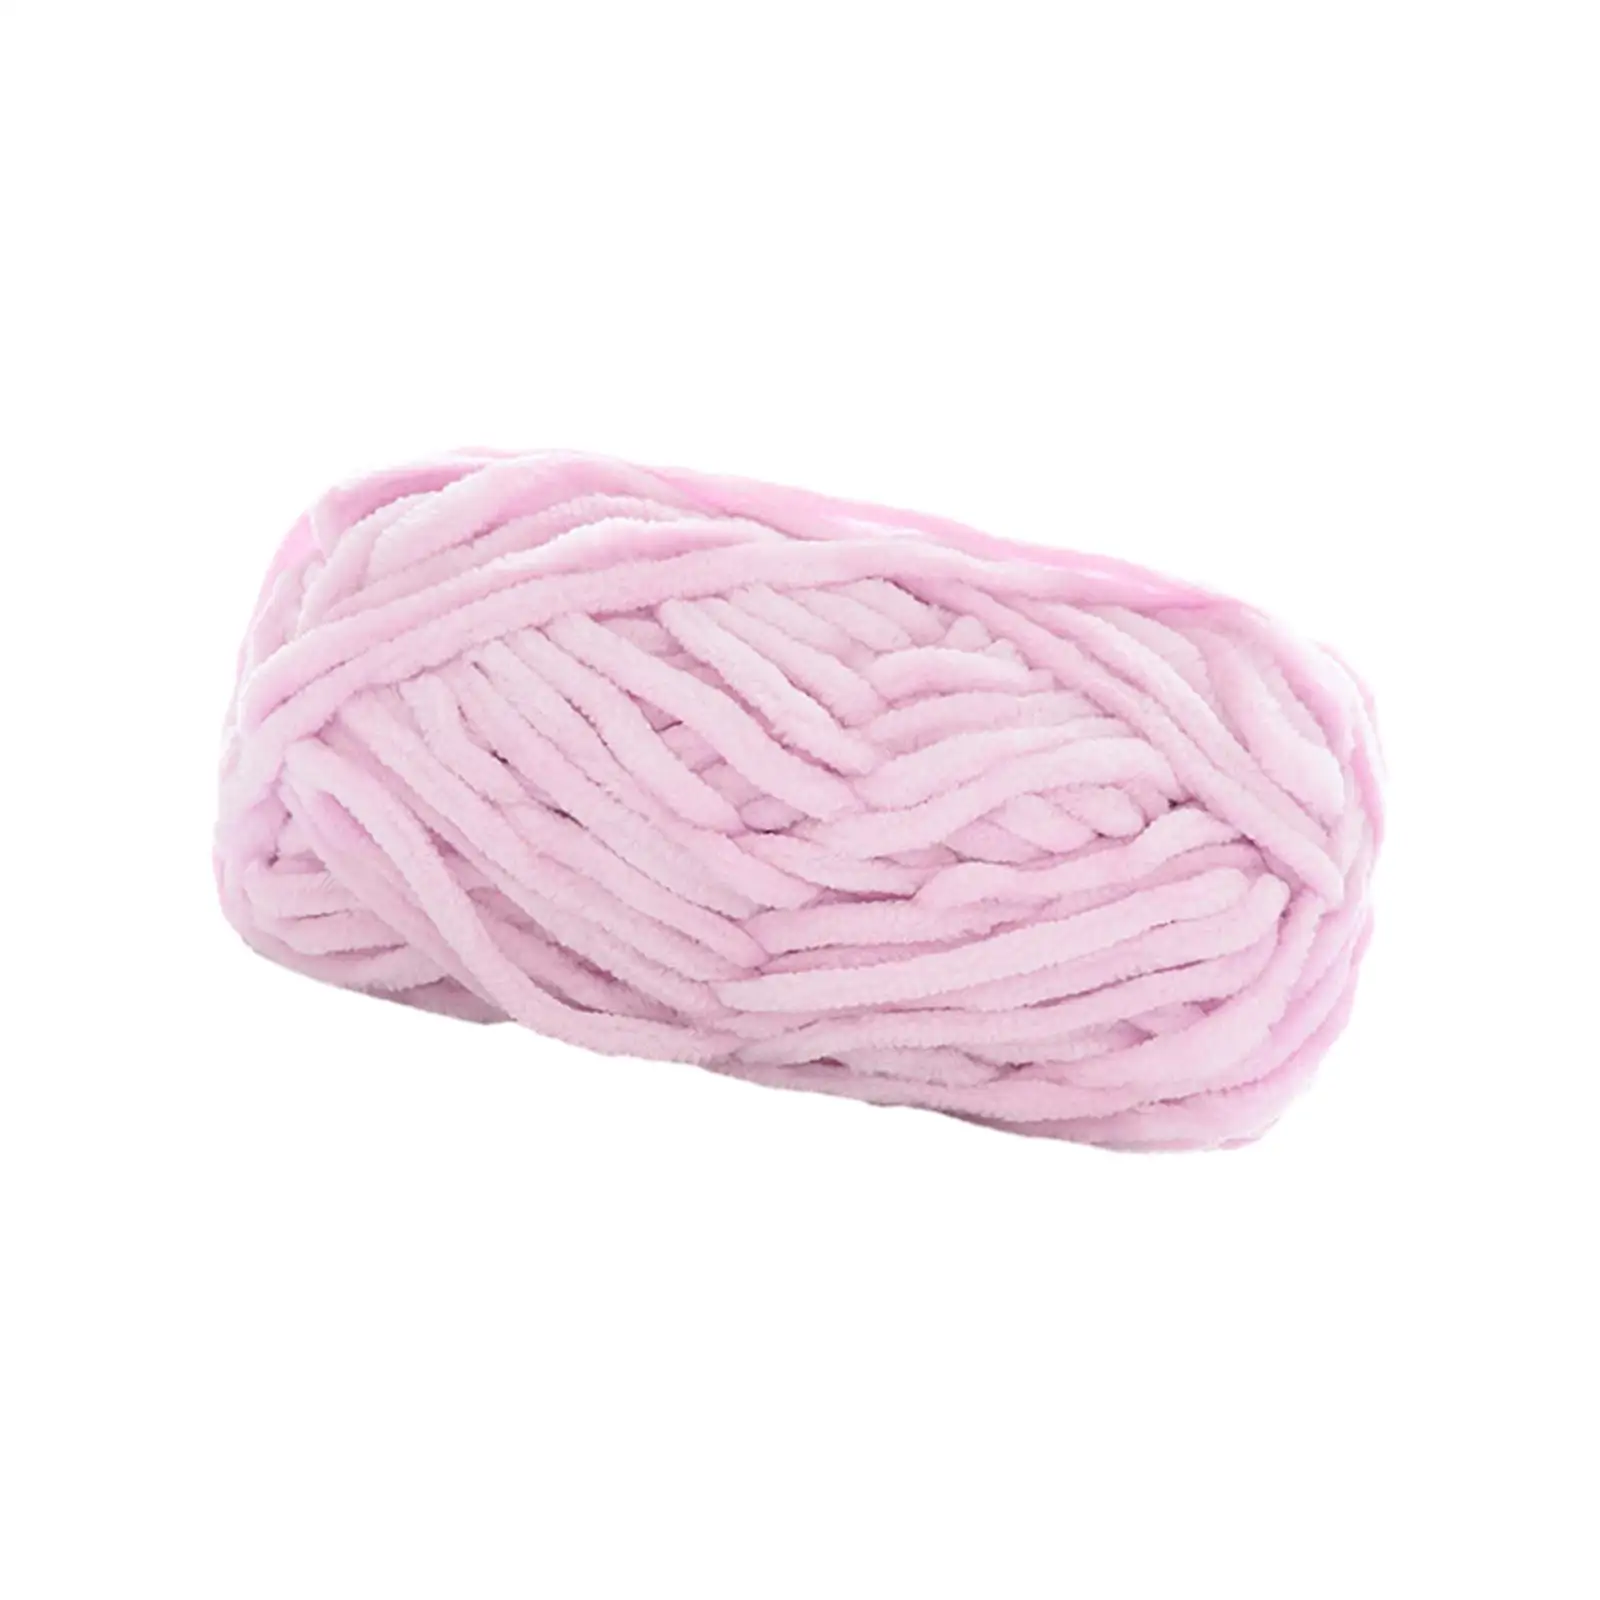 Thick Chunky Yarn Super Bulky Giant Wool Yarn Tube Giant Yarn Hand Knitting Bulky Yarn for Craft Pillow Sweaters Weaving Pet Bed